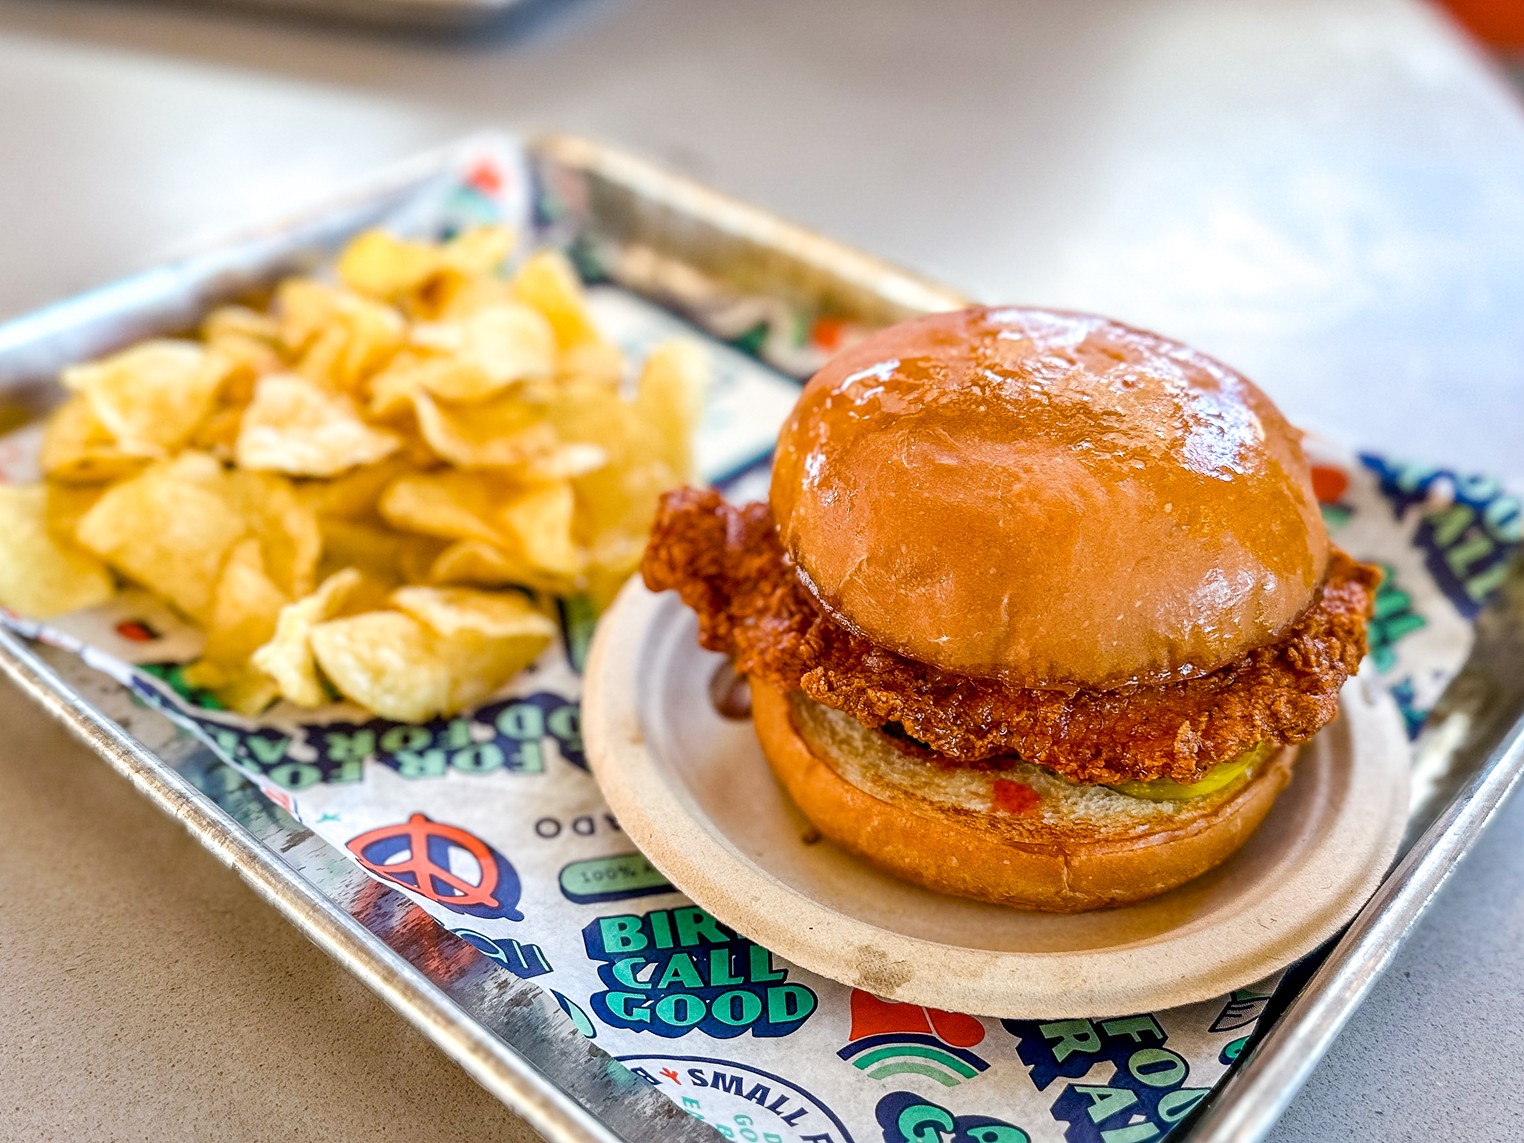 First Look: Denver-Based Birdcall Brings Its Chicken Sandwiches to Dallas